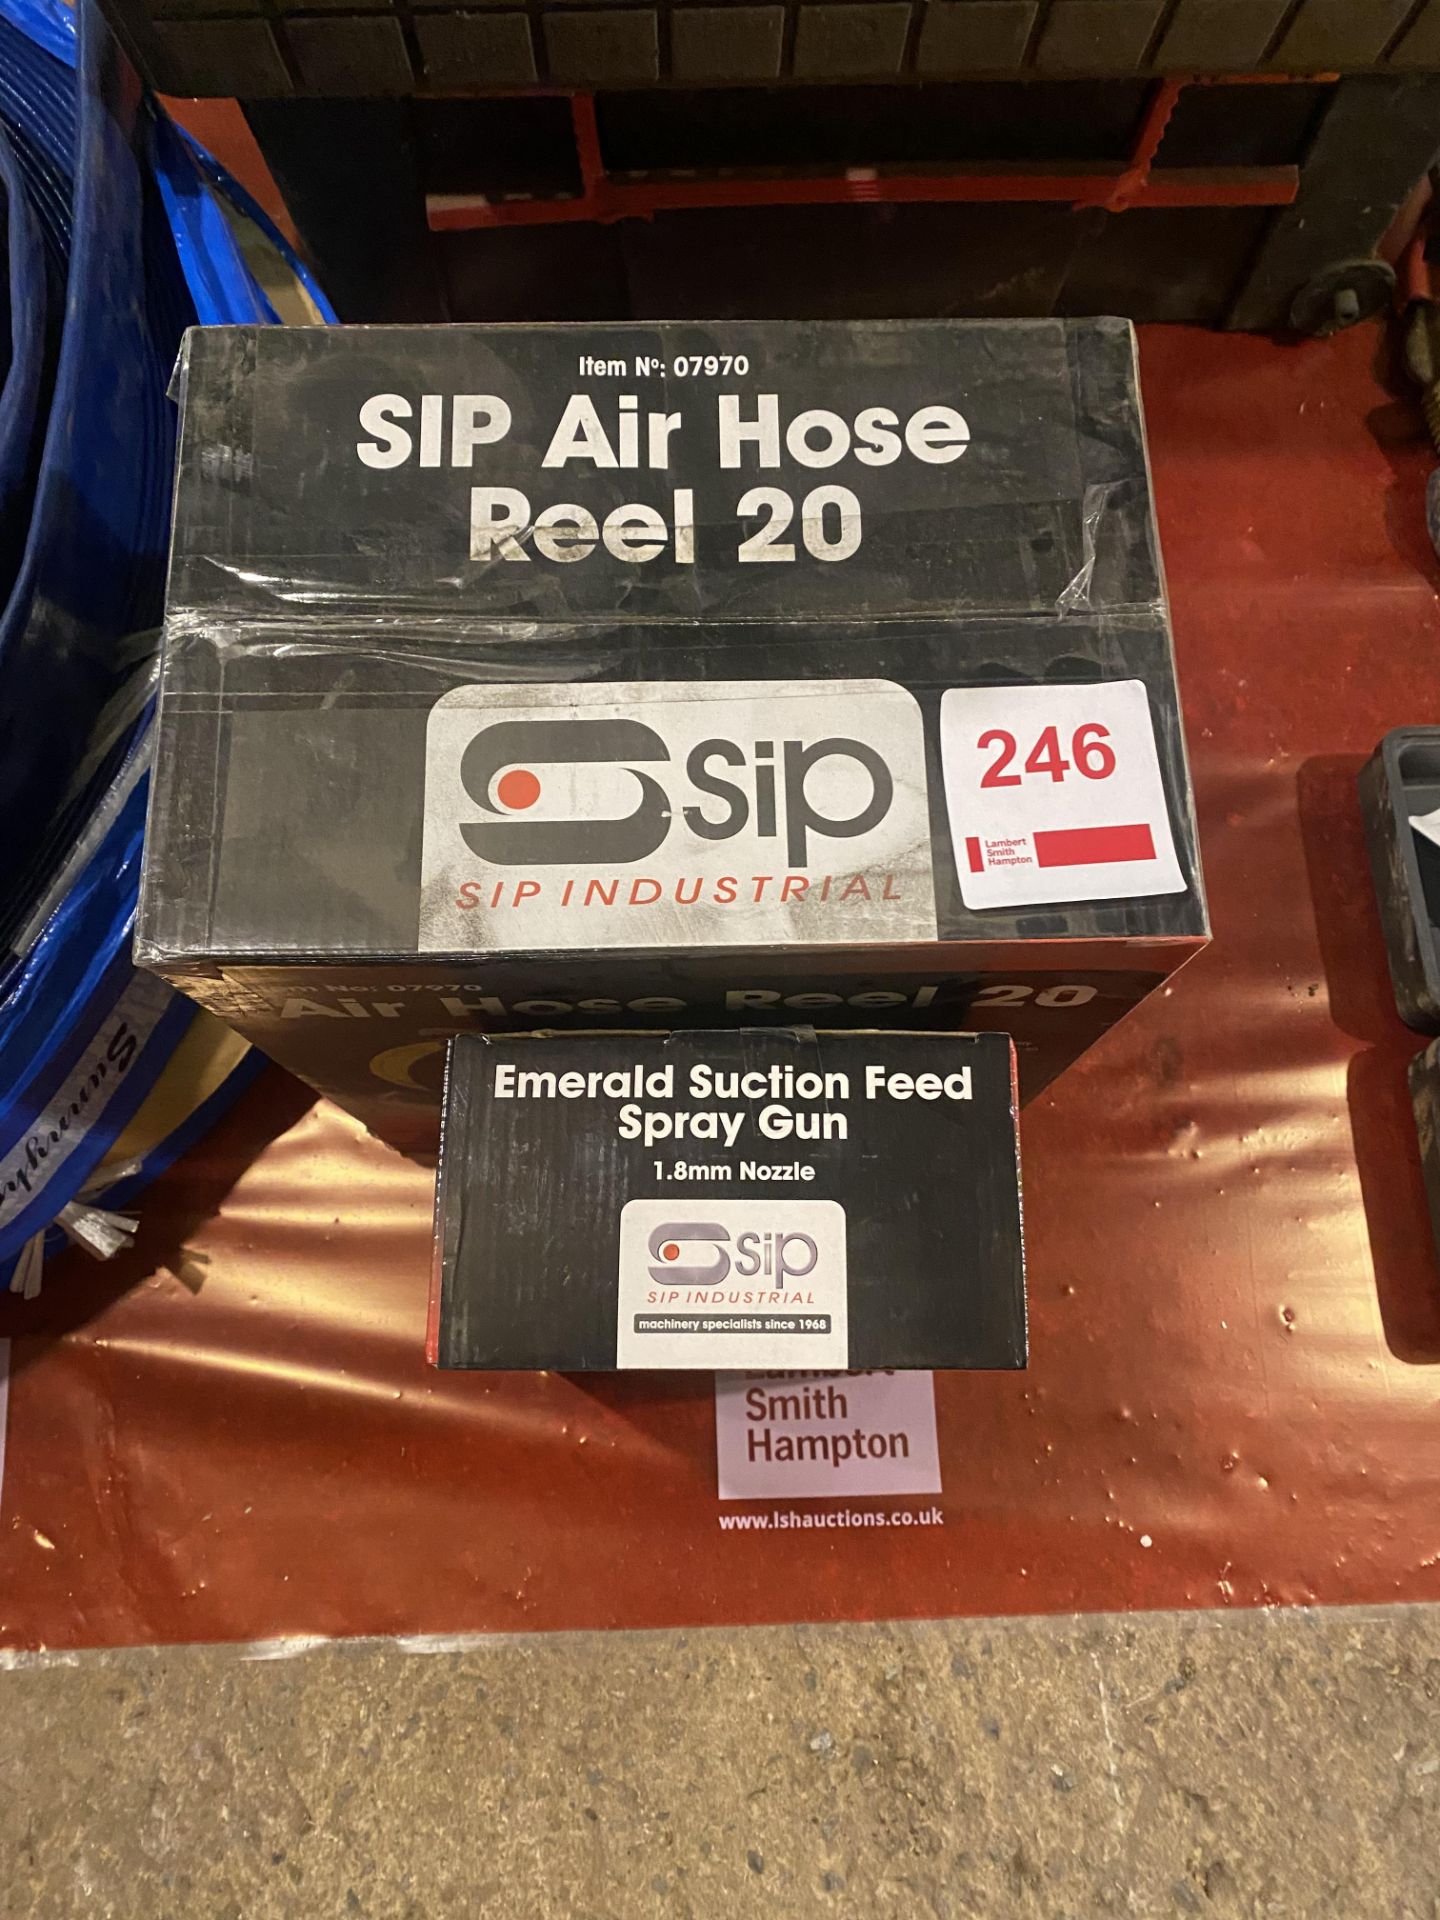 SIP reeled air hose, item no. 07970, and Emerald suction feed spray gun, item no. 02126, nozzle 1. - Image 2 of 3